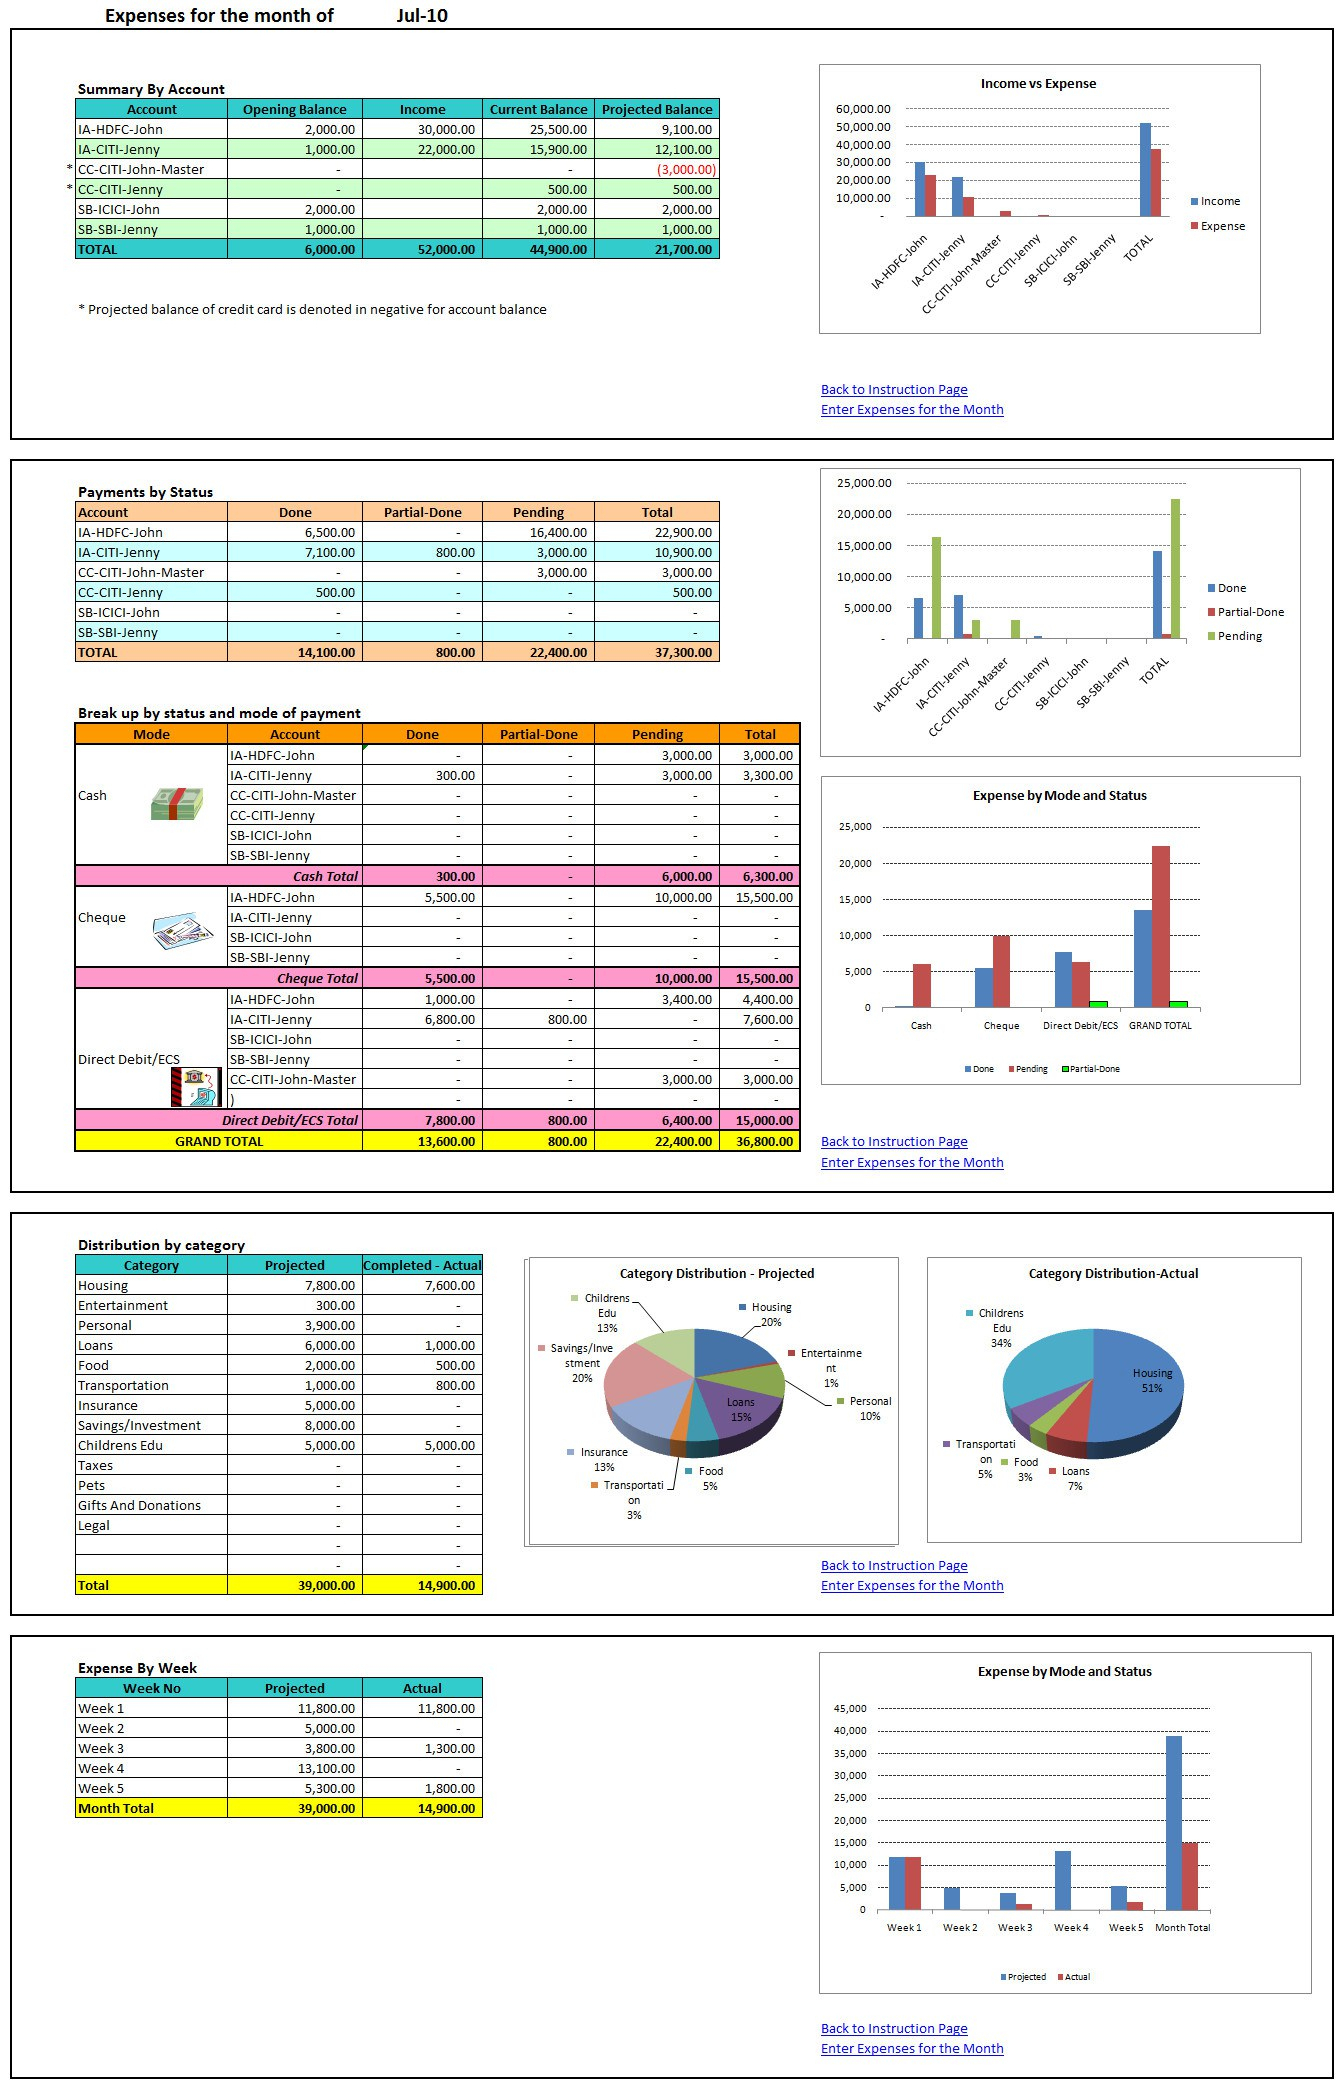 Pearbudget Spreadsheet In Pearbudget Spreadsheet On How To Make An Excel Spreadsheet Budget